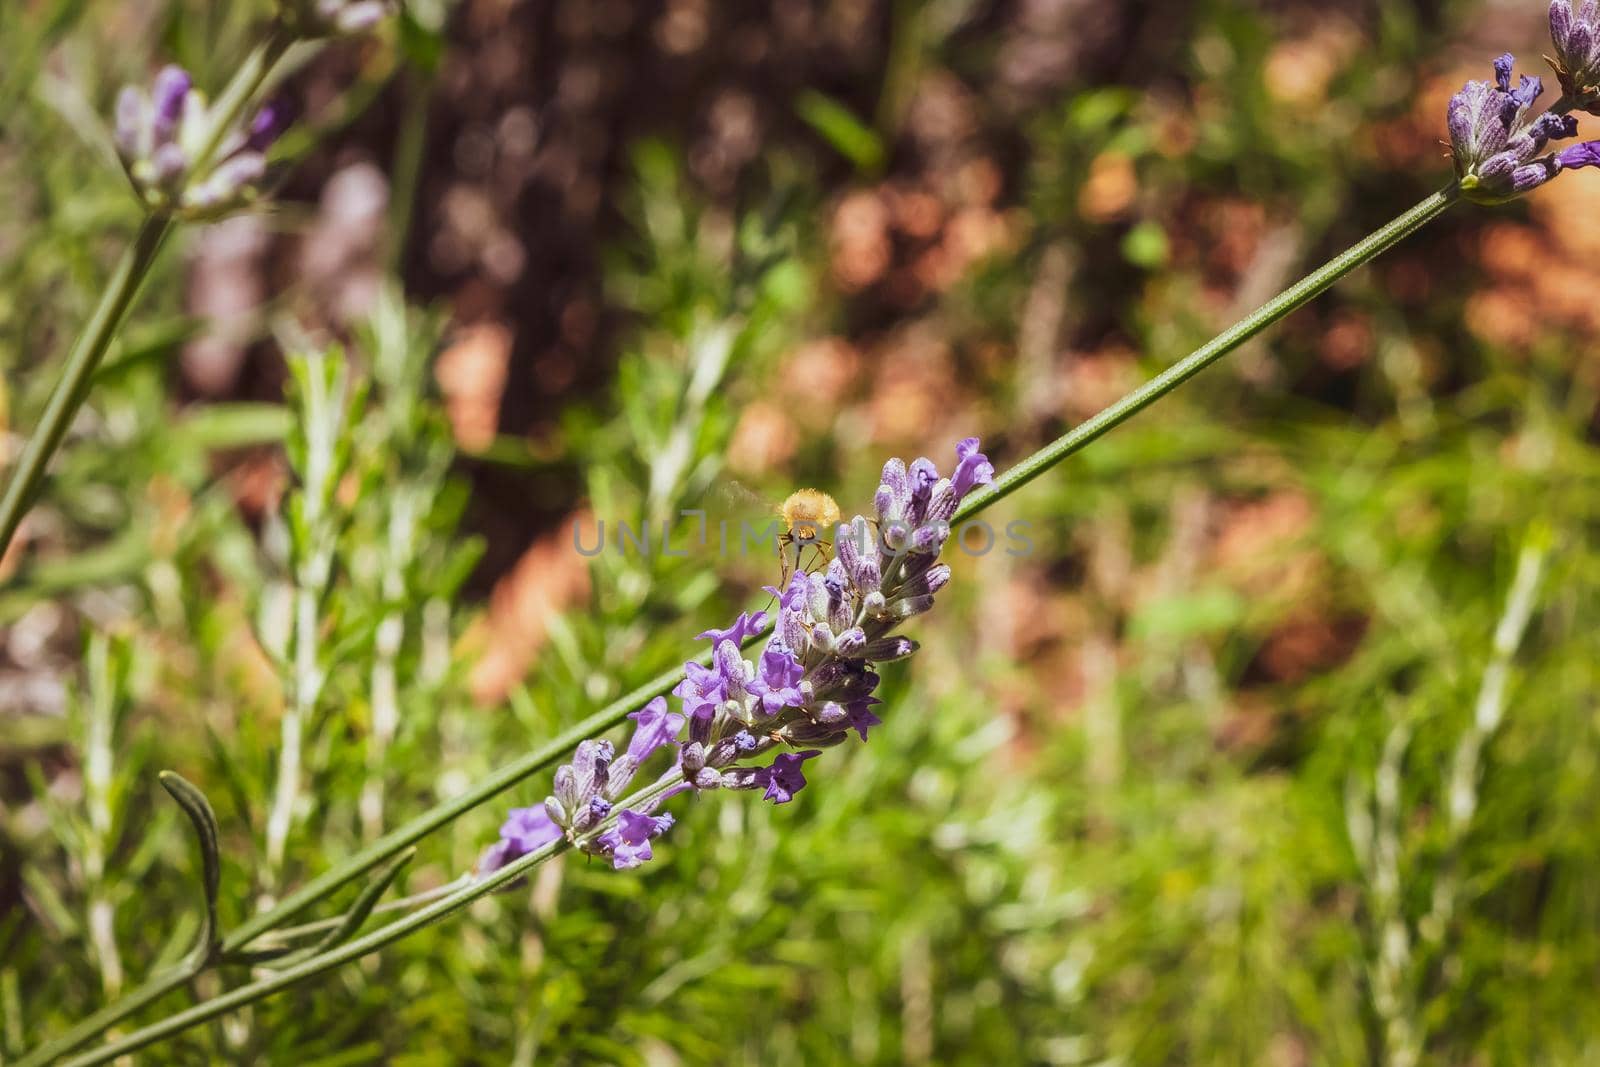 Closeup of a bee preparing to suck nectar from a beautiful lavender flower, during the summer season.